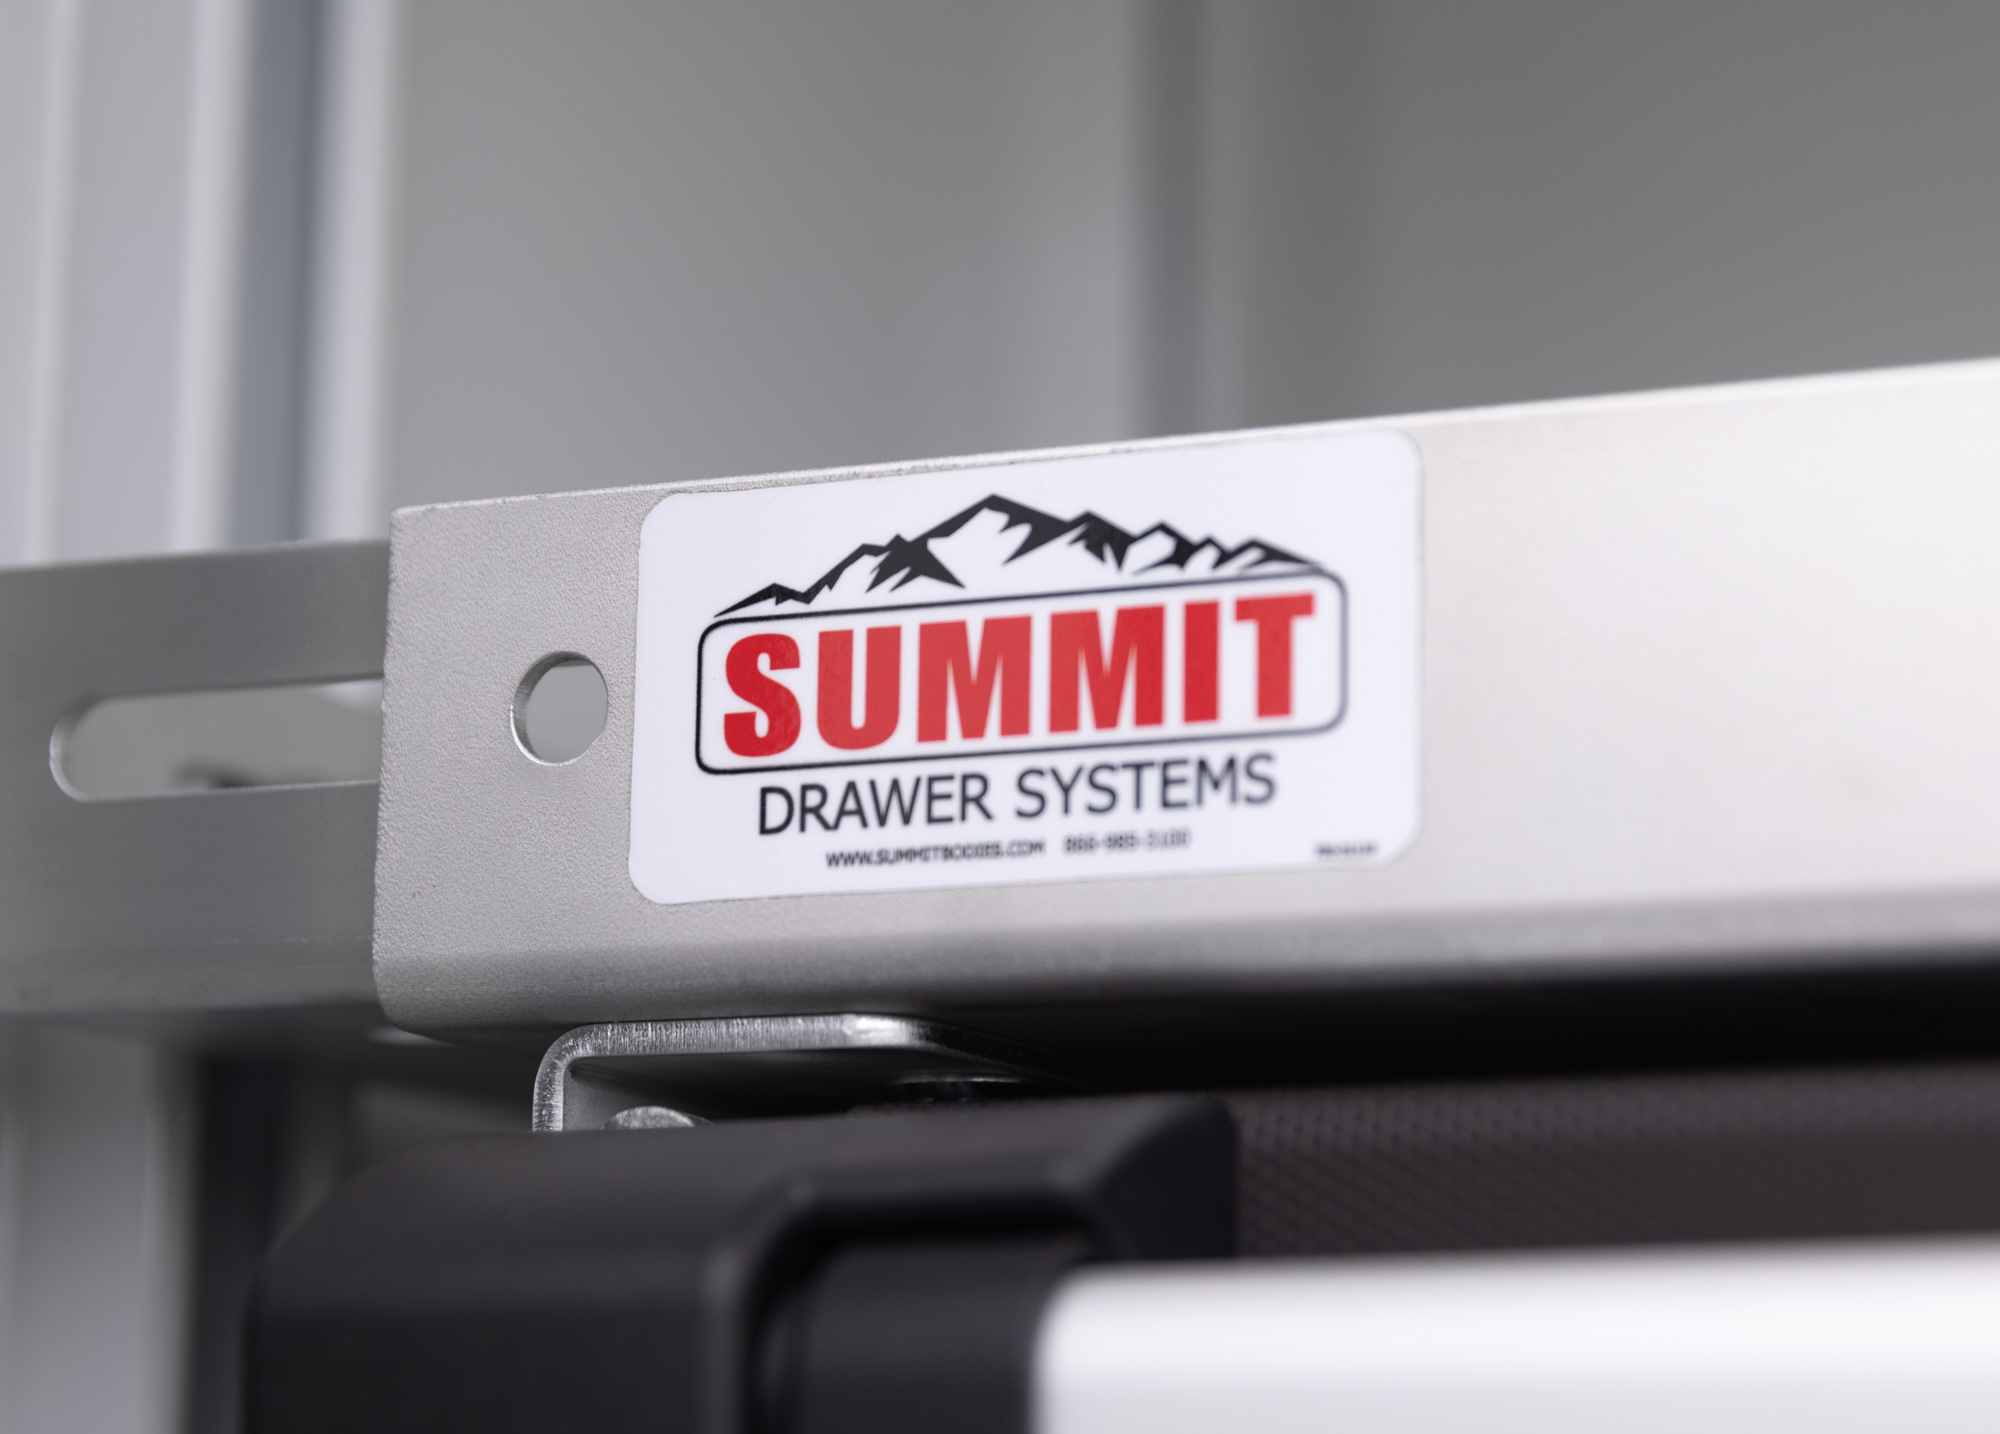 Accessories background image - Summit Drawer Systems